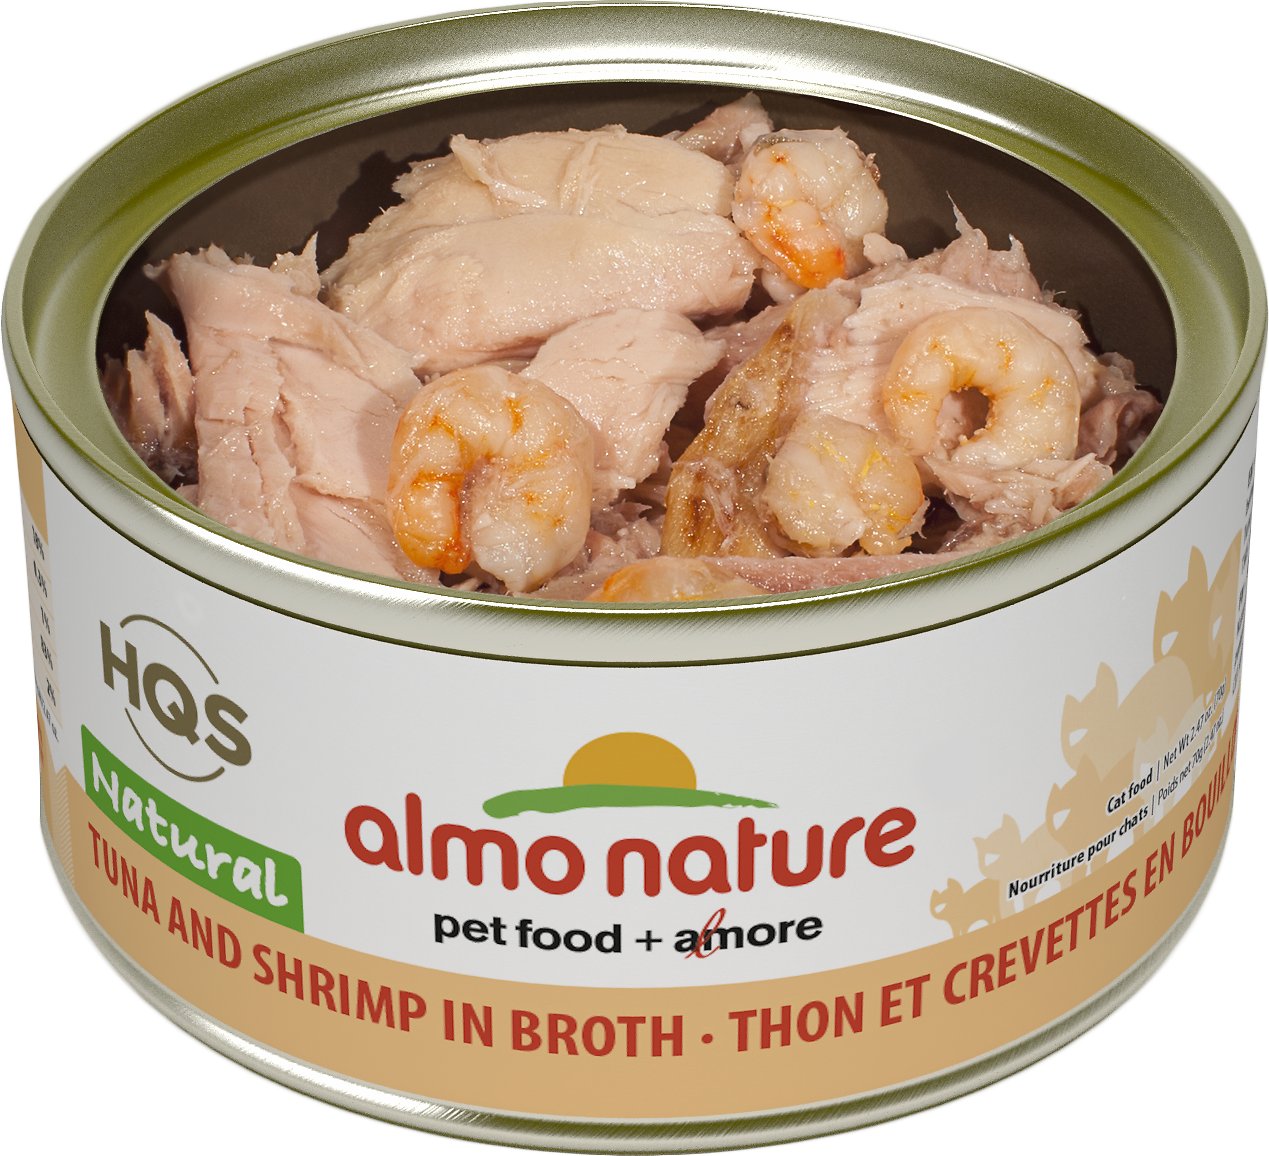 Almo Nature | Pet Food Stores Near Me Toronto | HQS Natural Tuna and Shrimps in Broth | ARMOR THE POOCH